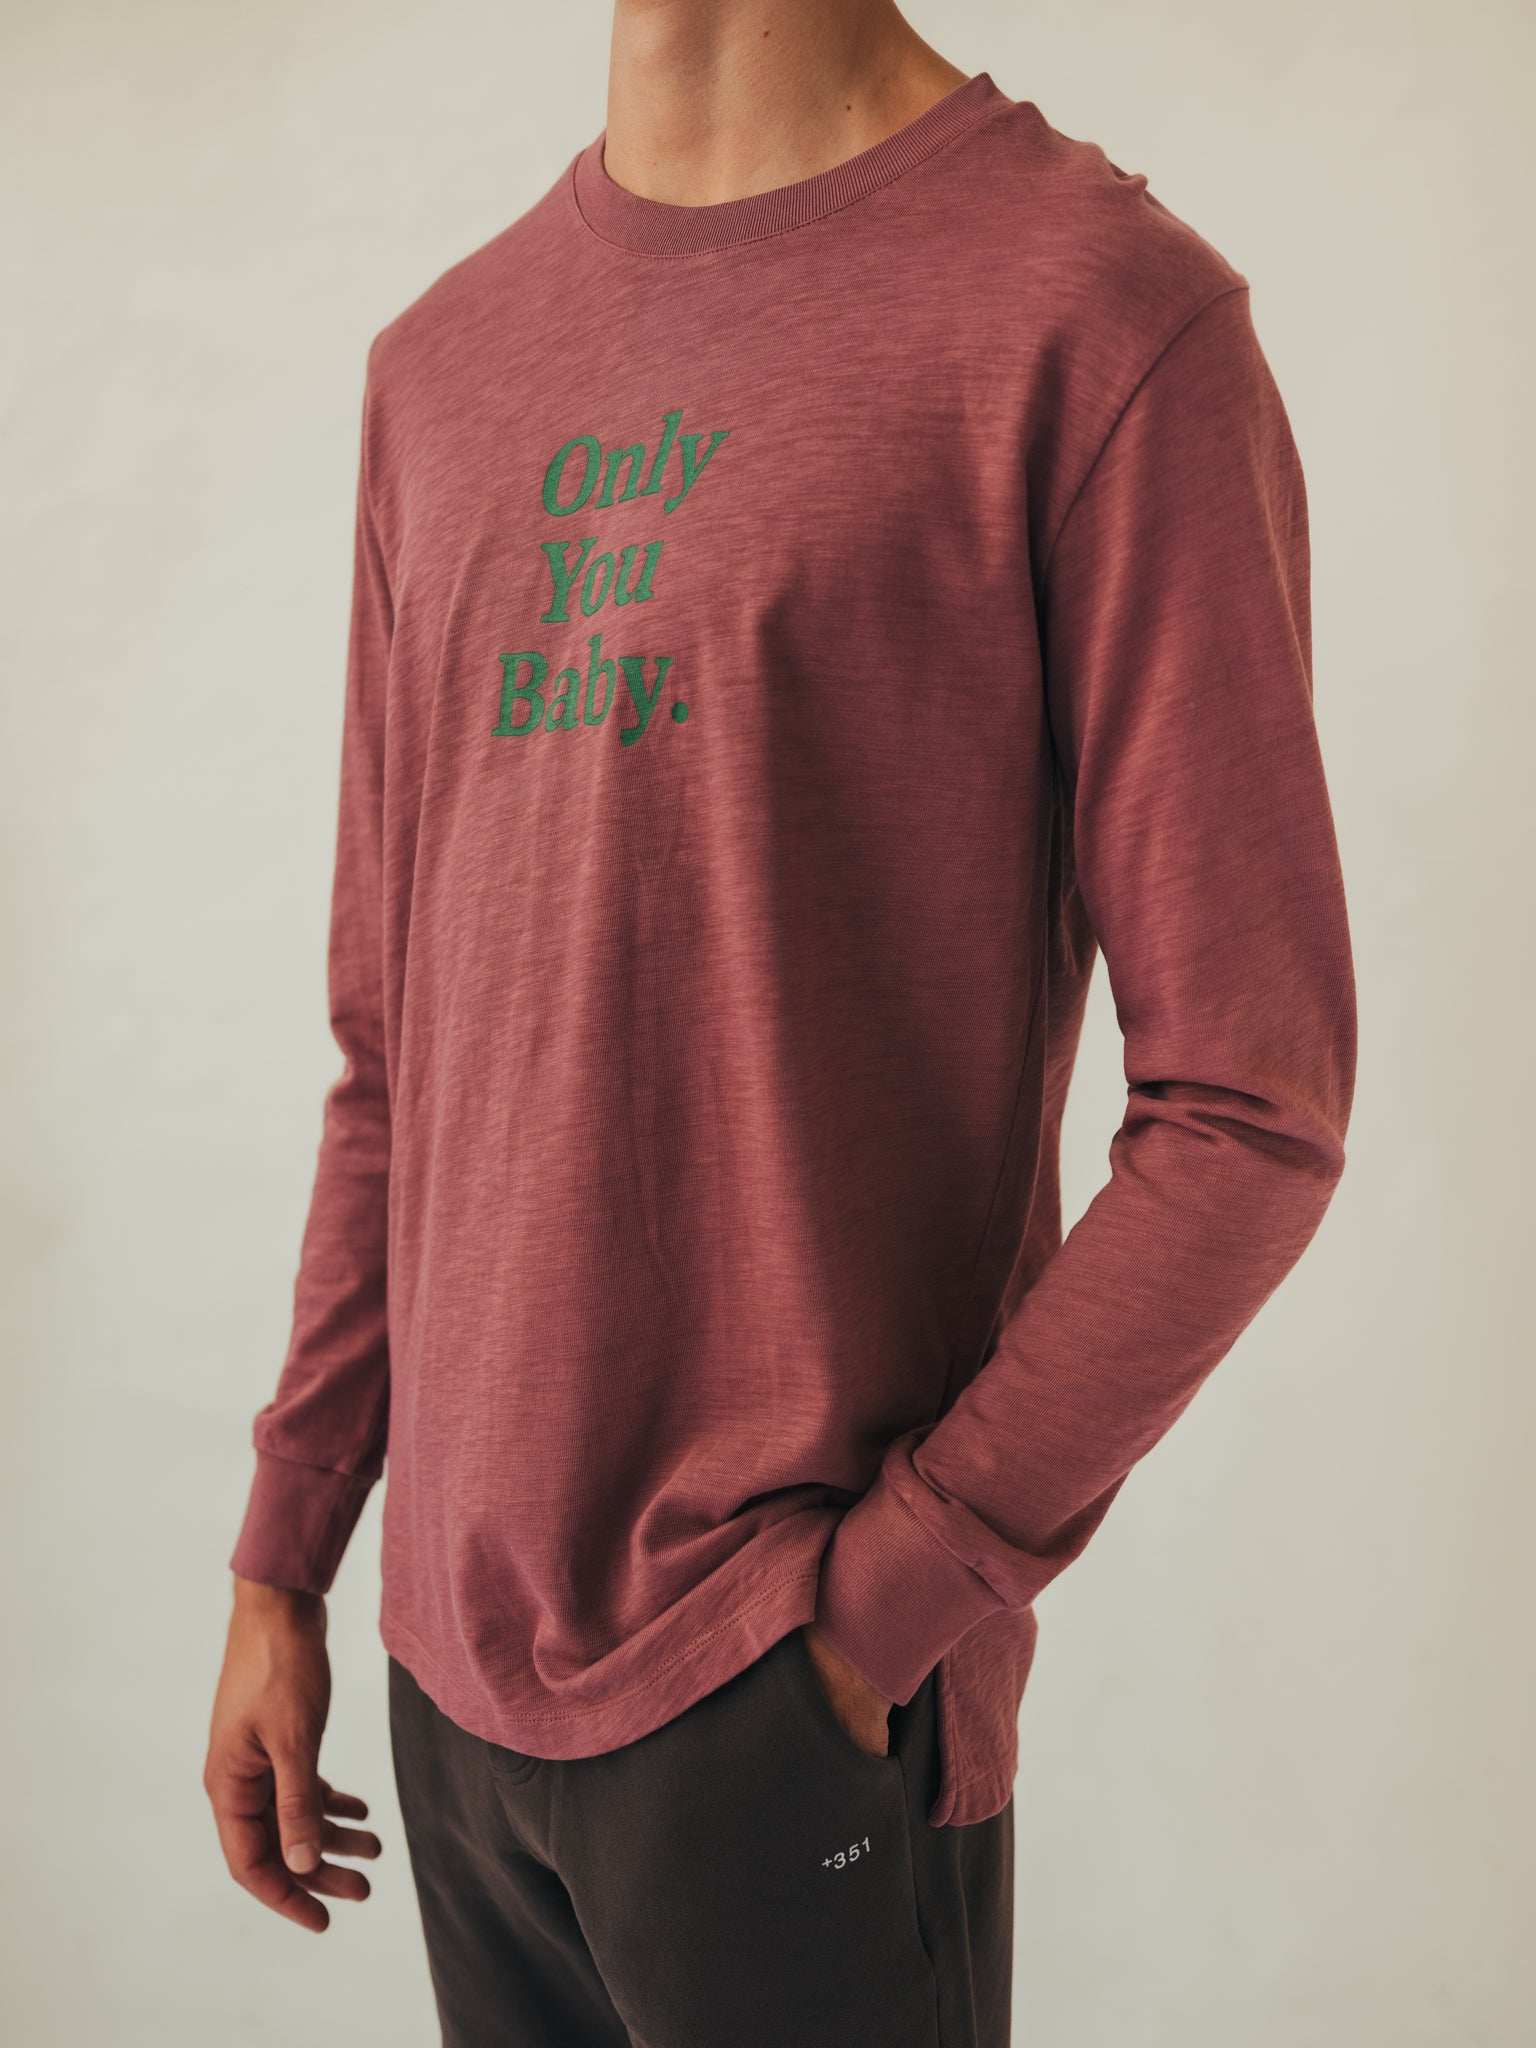 LONG SLEEVE GRAPHIC ONLY YOU BABY AUBERGINE & TURTLE GREEN